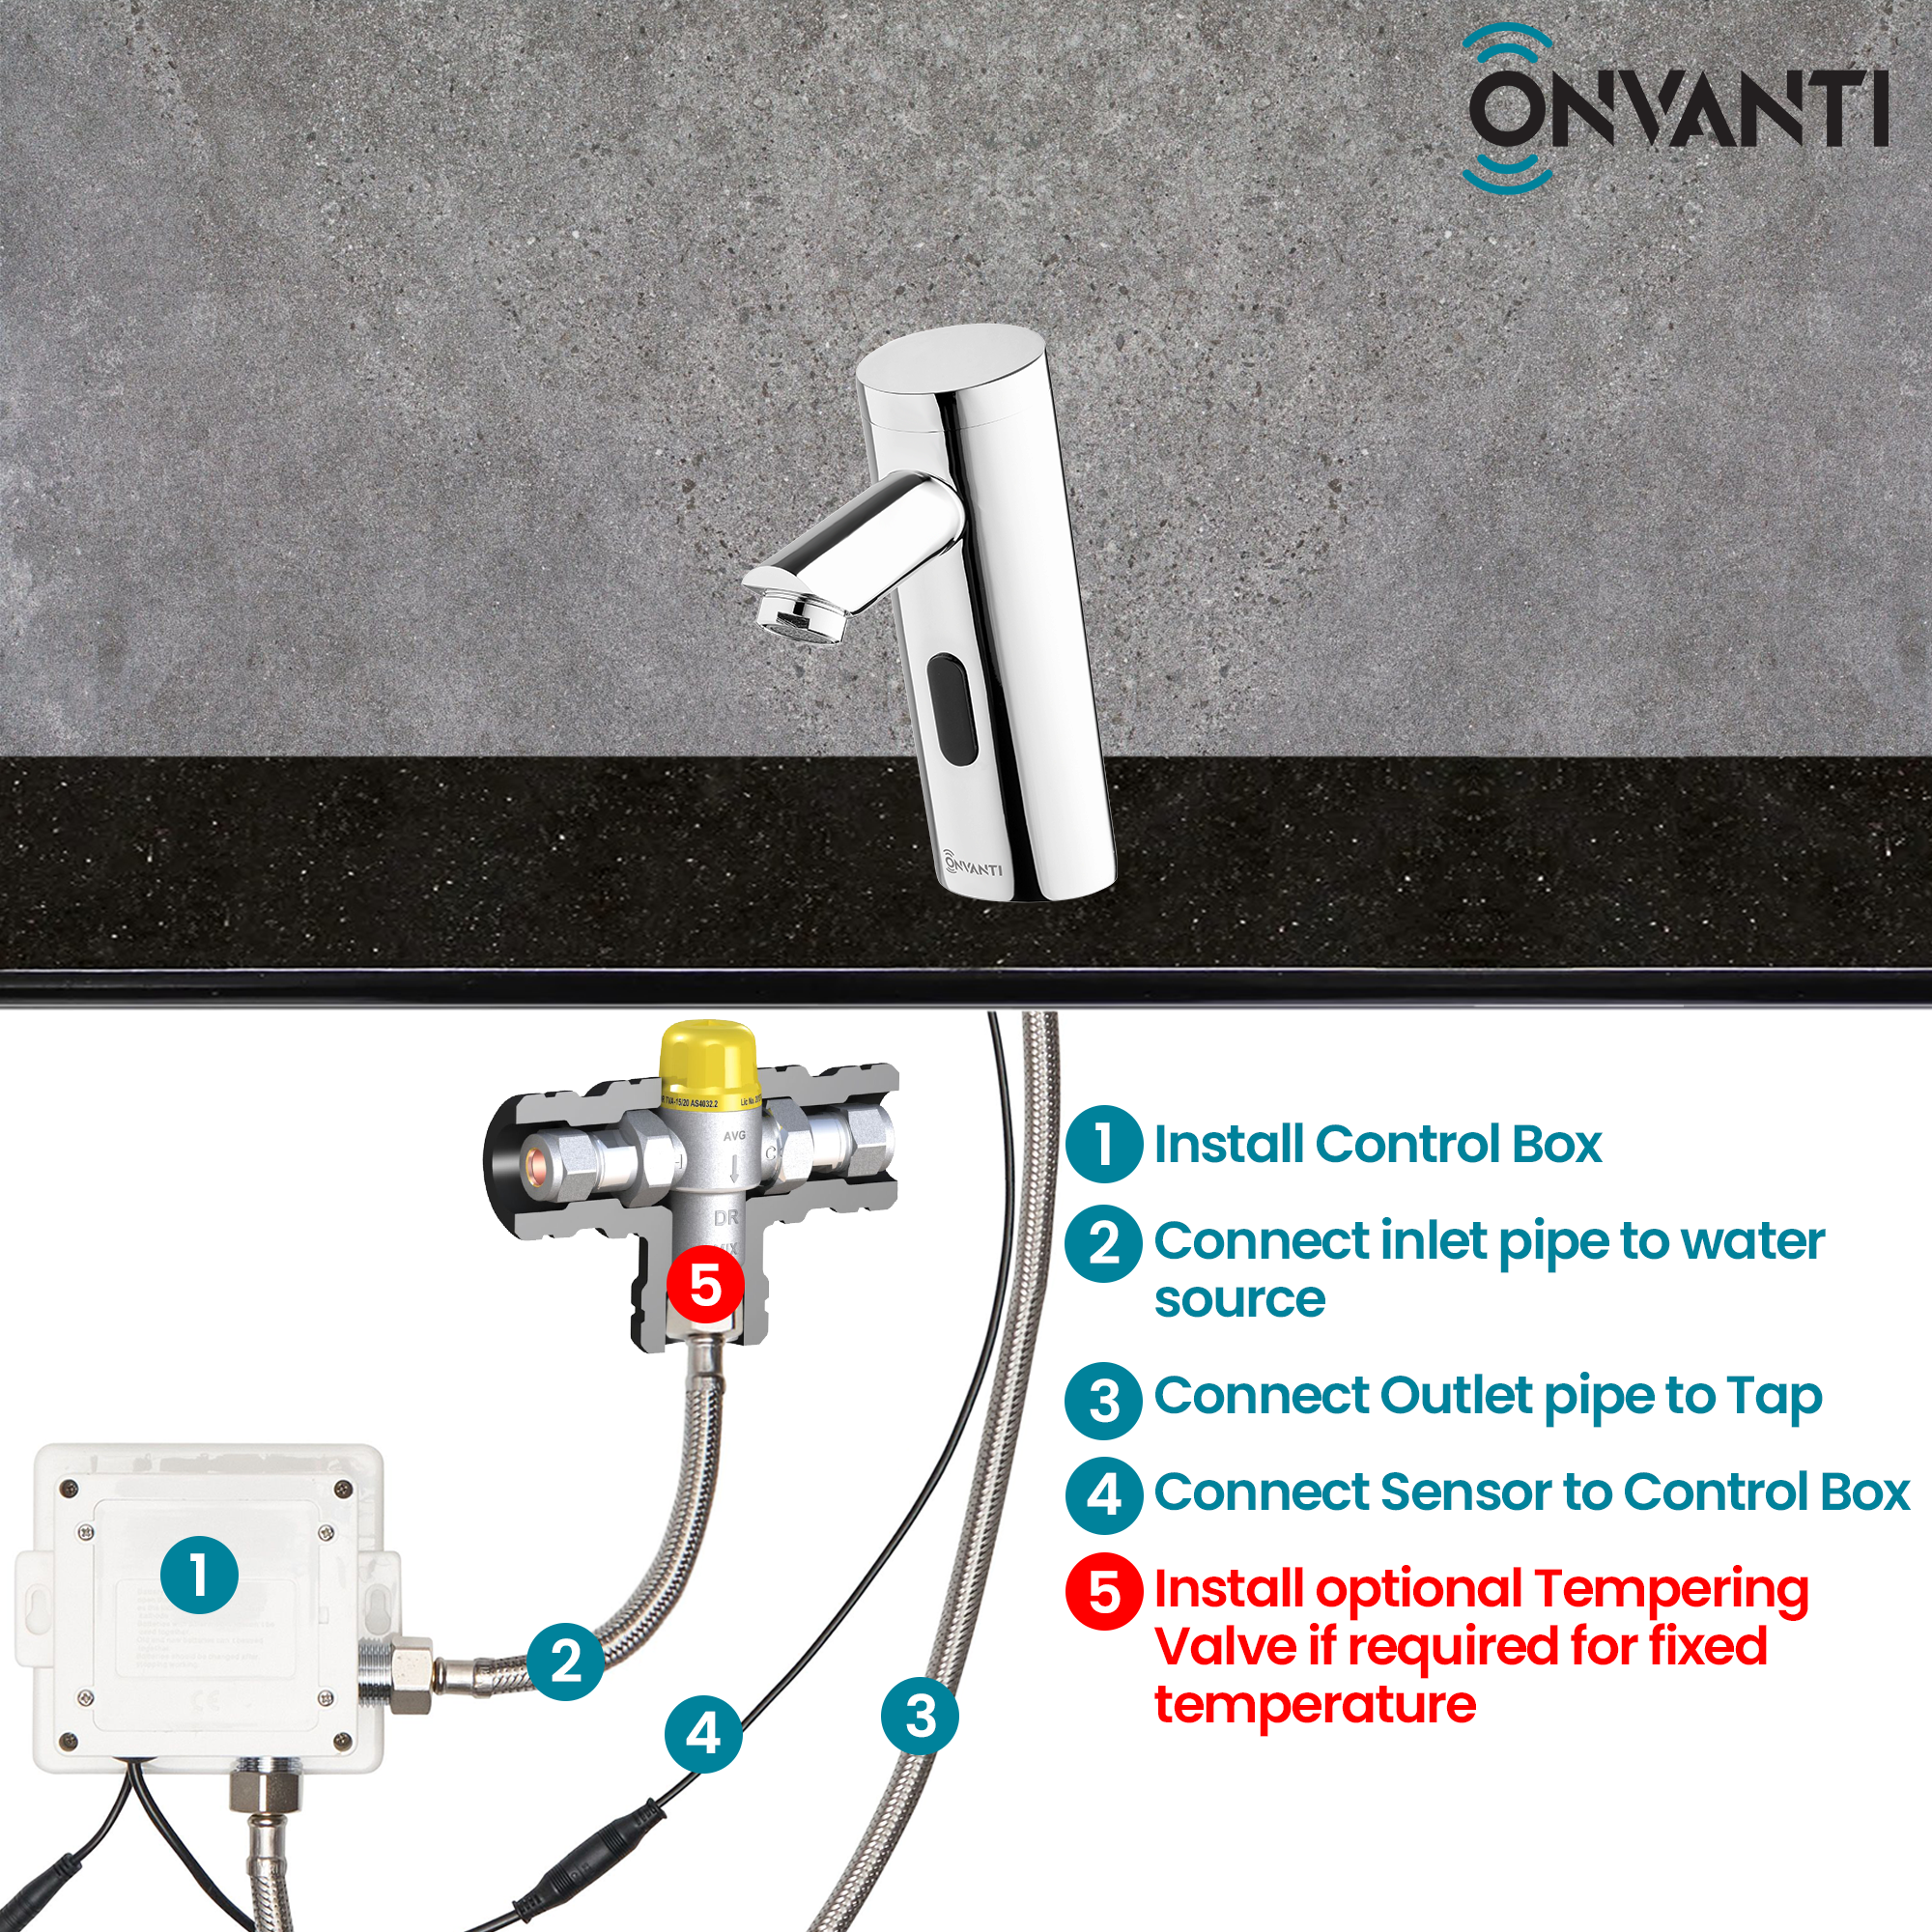 Onvanti Sensor Tap for Commercial or Public Bathrooms Mains or Battery Operated Freshwater SF1107